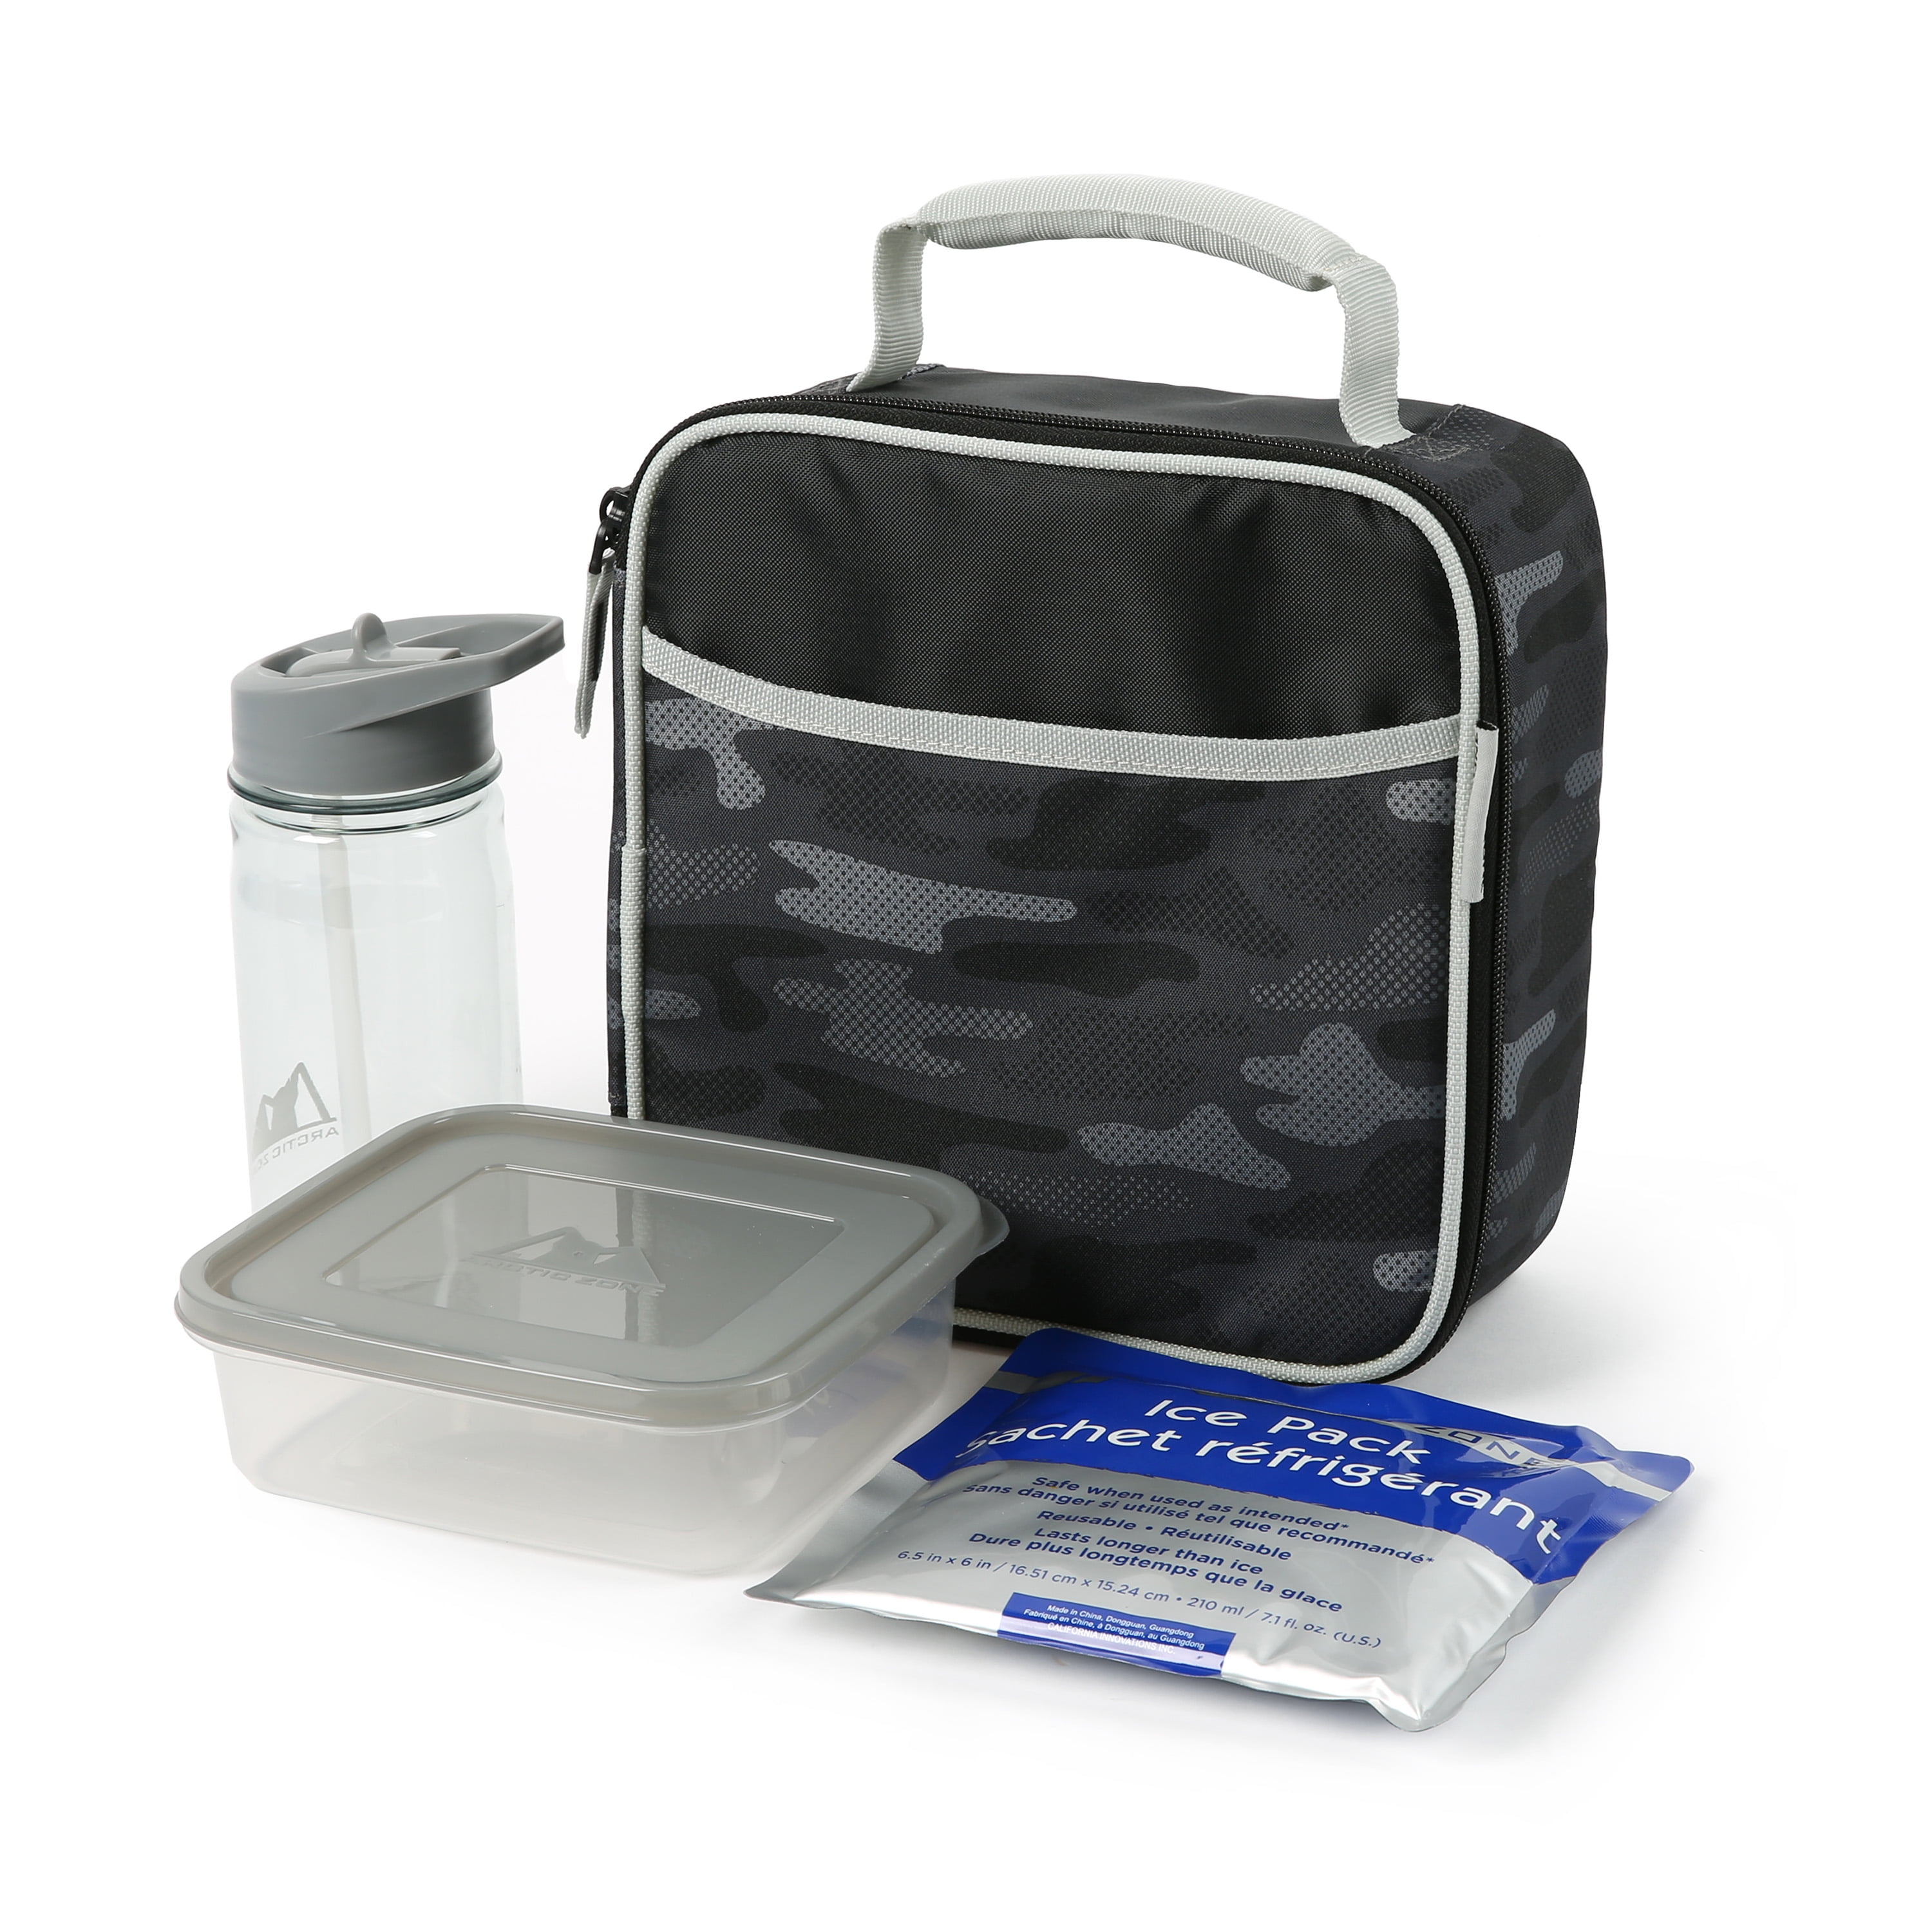 Arctic Zone Reusable Lunch Box Combo Kit with Accessories, Leopard